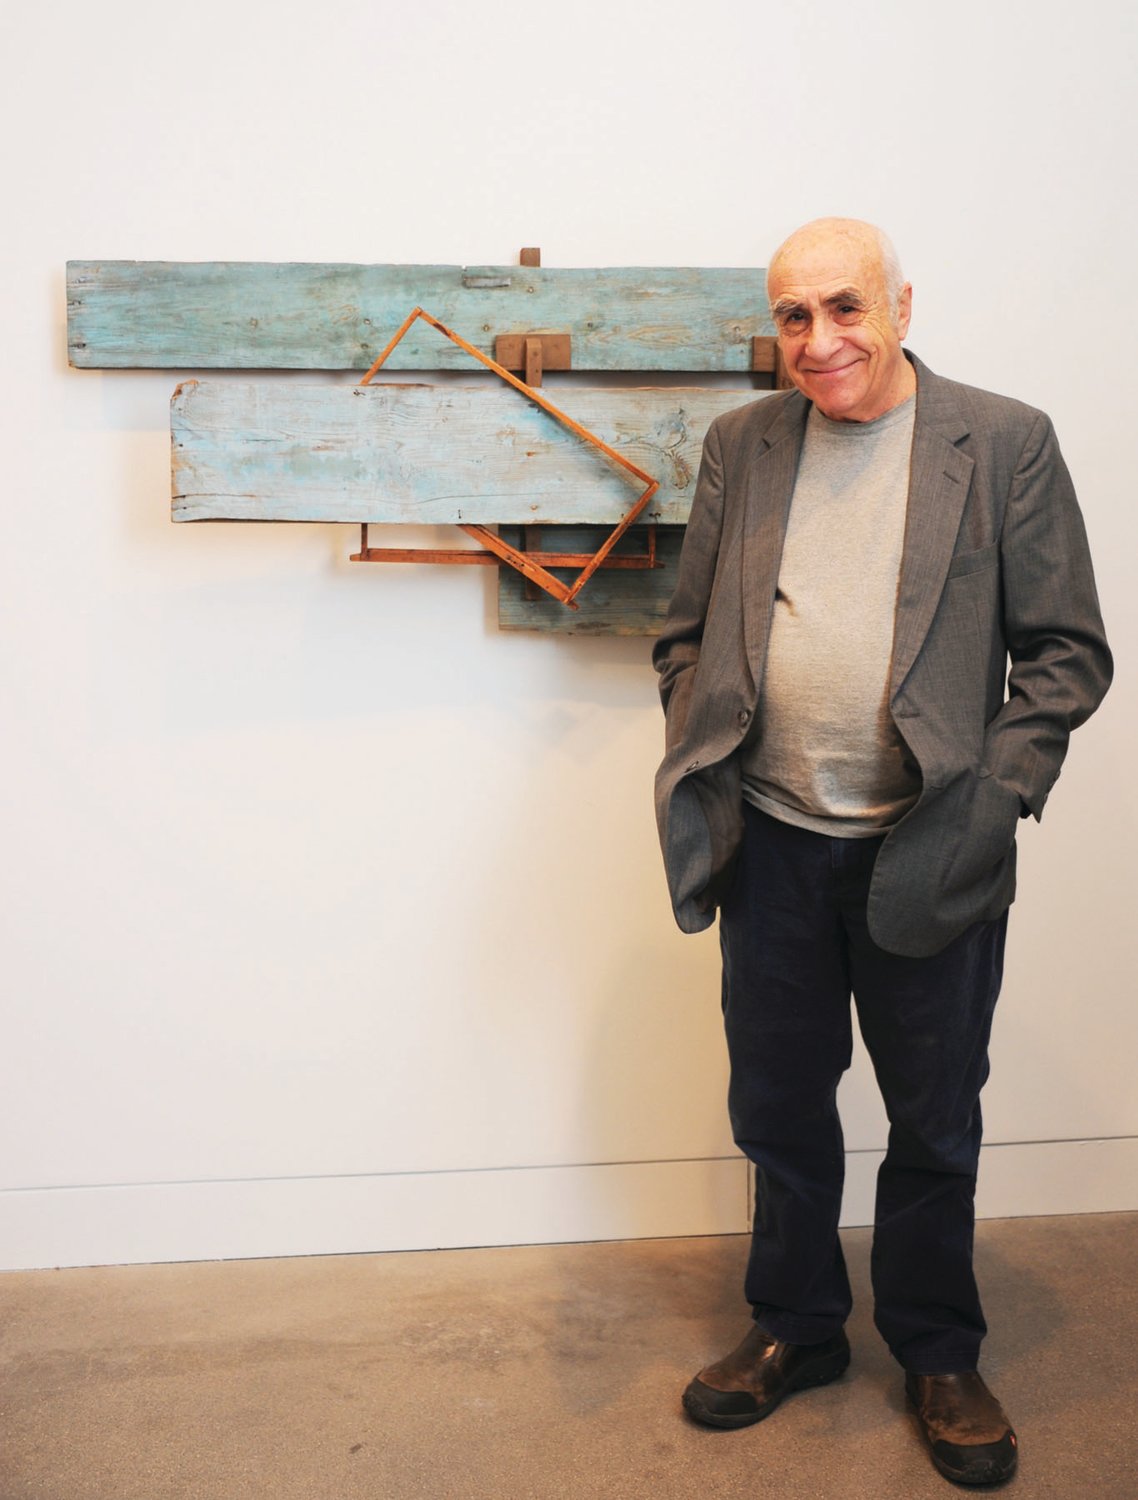 Artist Paul Bowen creates art from scavenged wood and other natural materials.